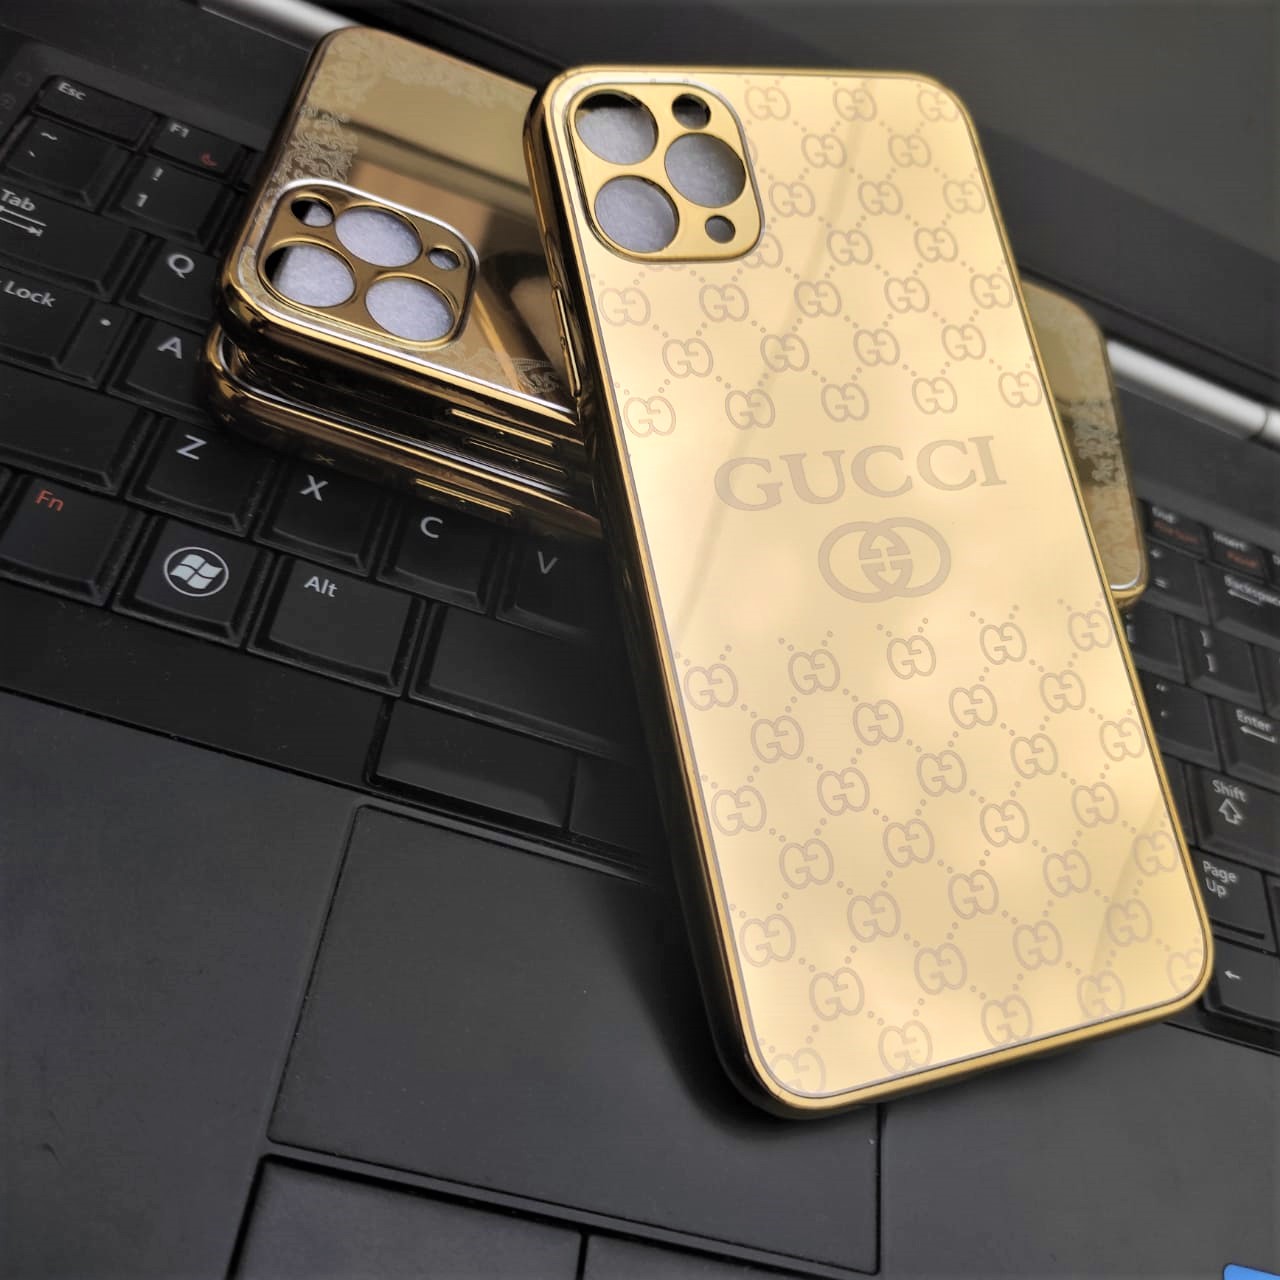 Iphone 11 Pro Max Golden Stylish Back Case Gucci Versace Lv Pinoro Hemoro Design Silicone Back Cover Fixer For Iphone 11 Pro Max Buy Online At Best Prices In Pakistan Daraz Pk